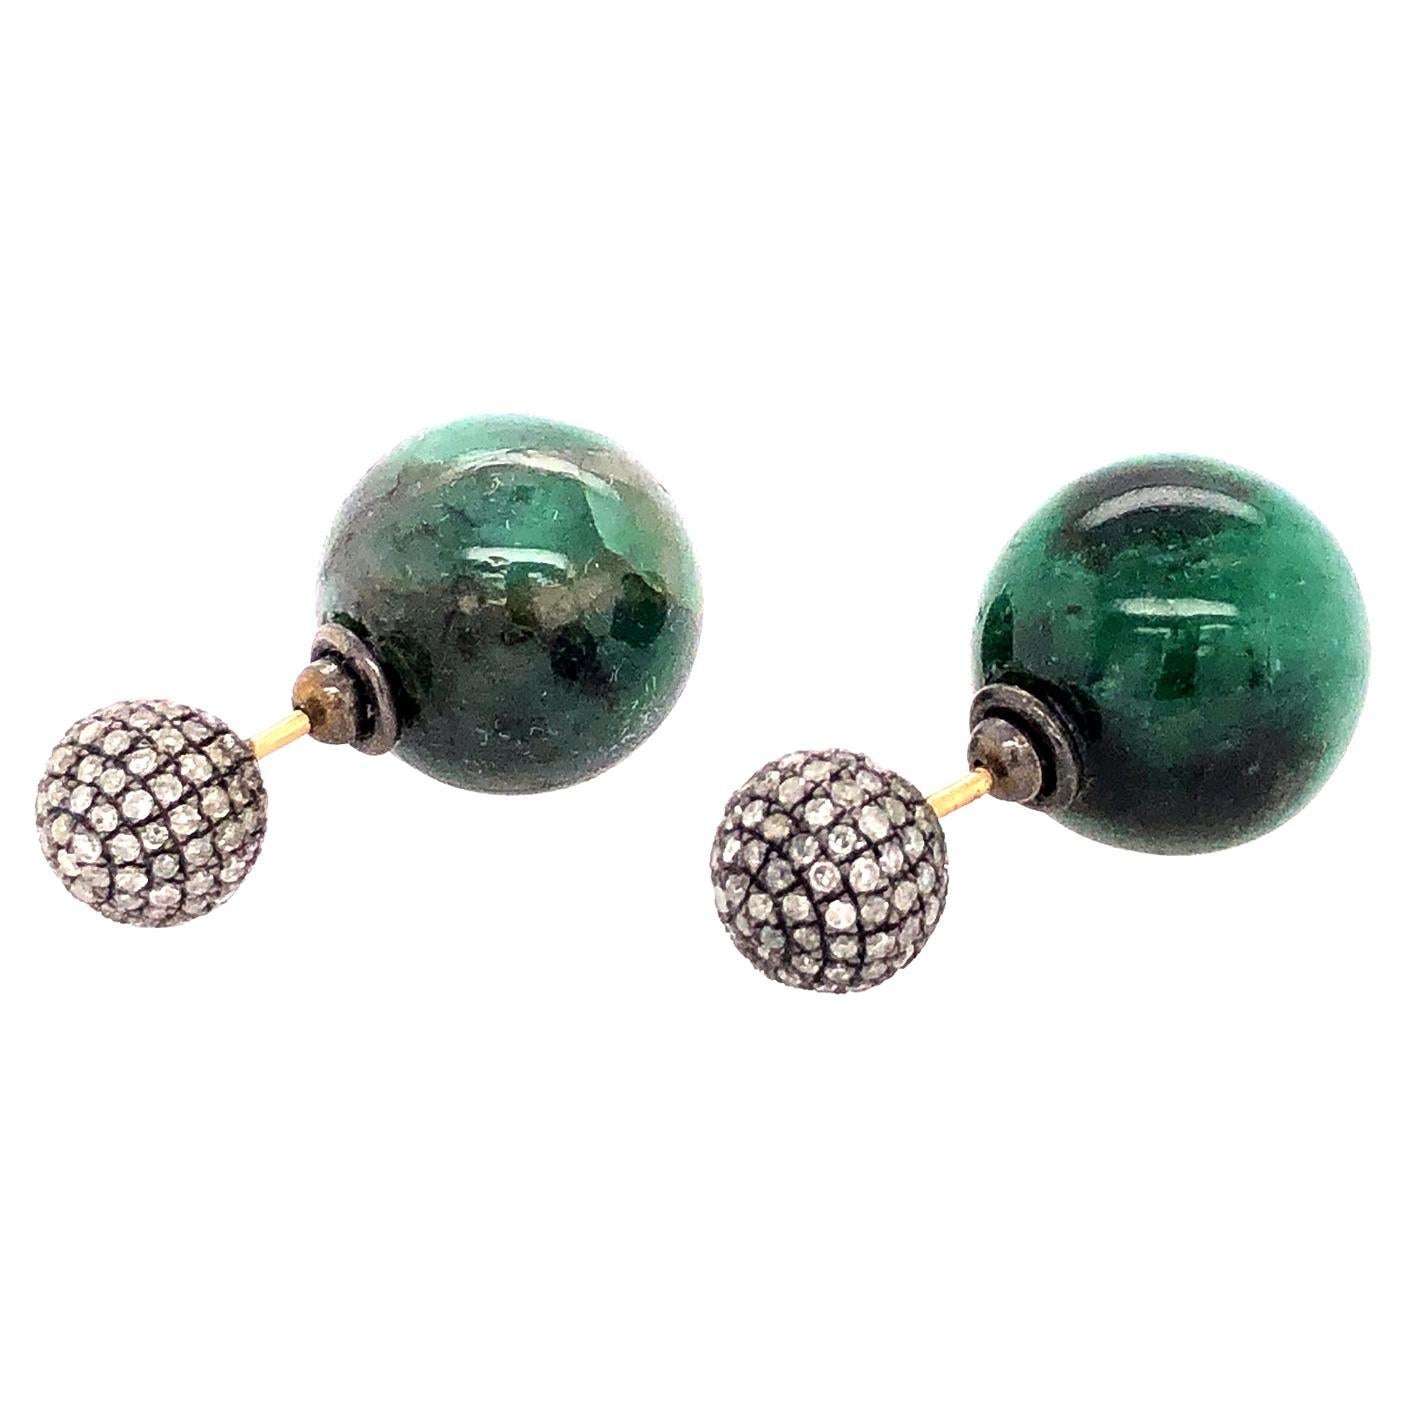 Emerald & Pave Diamond Ball Earrings Made In 14k Gold For Sale